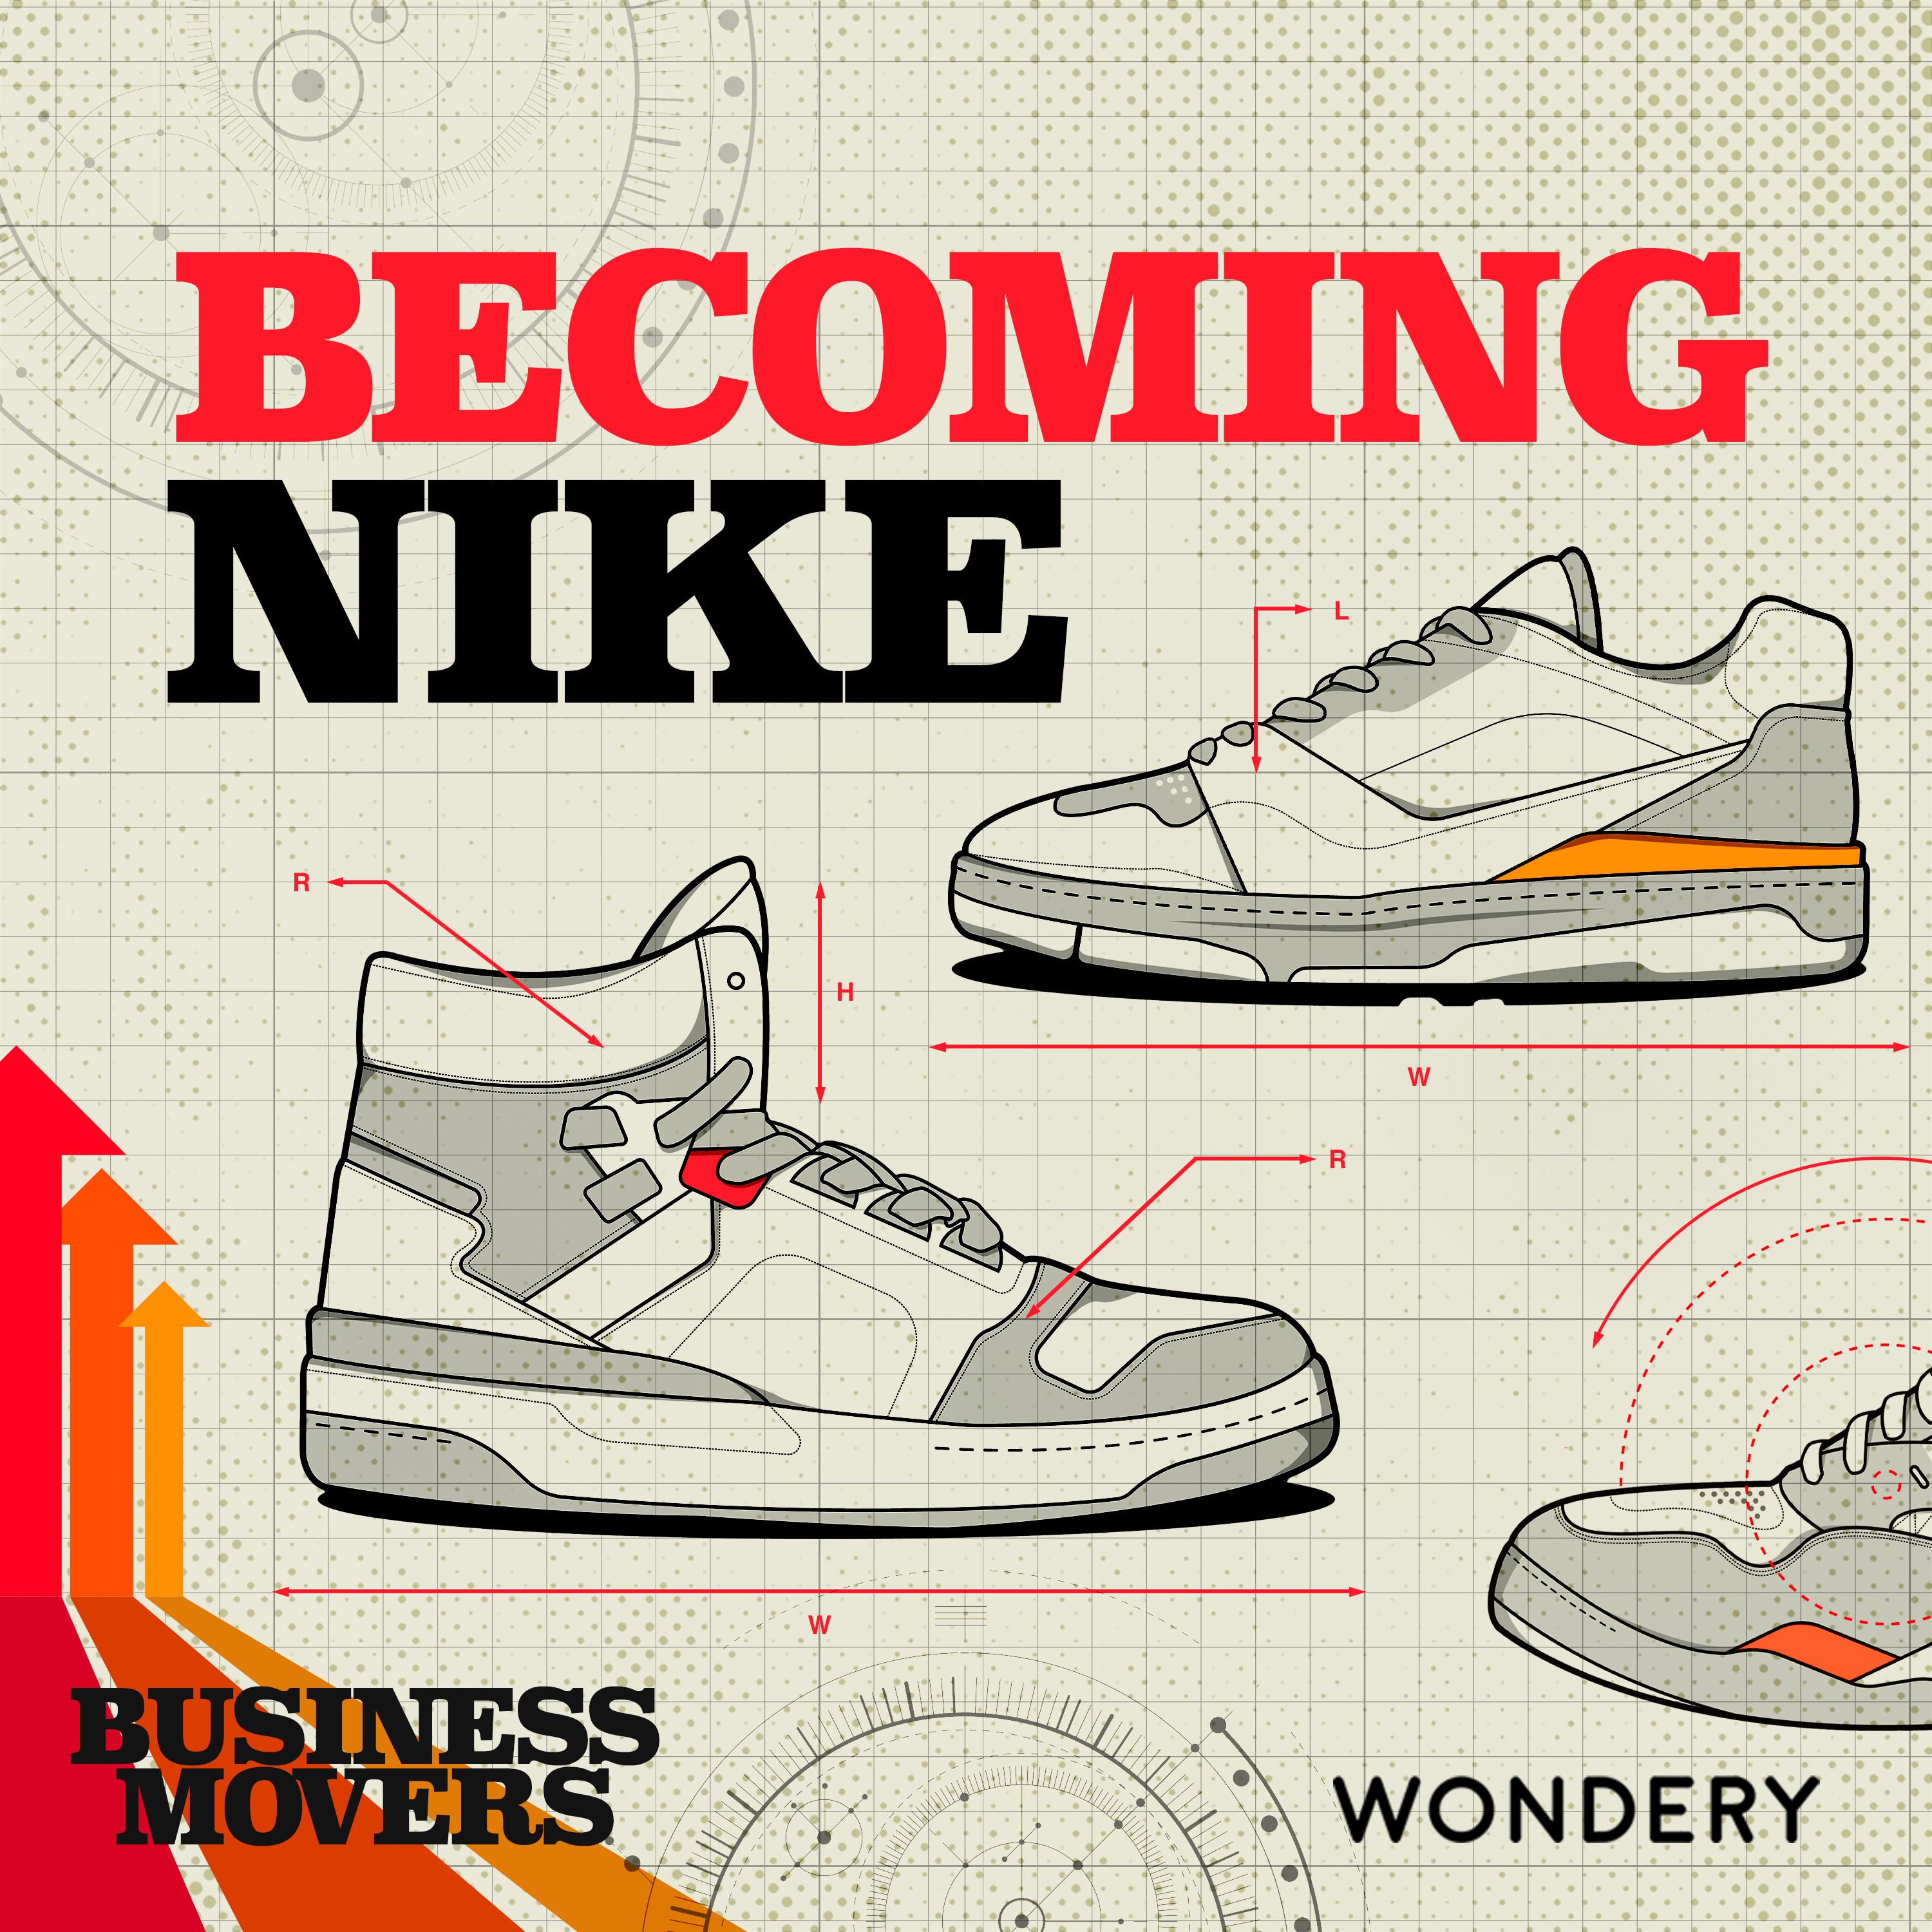 Becoming Nike | Author Nicholas K. Smith Explains Why Nike Might Be The King of Kicks | 5